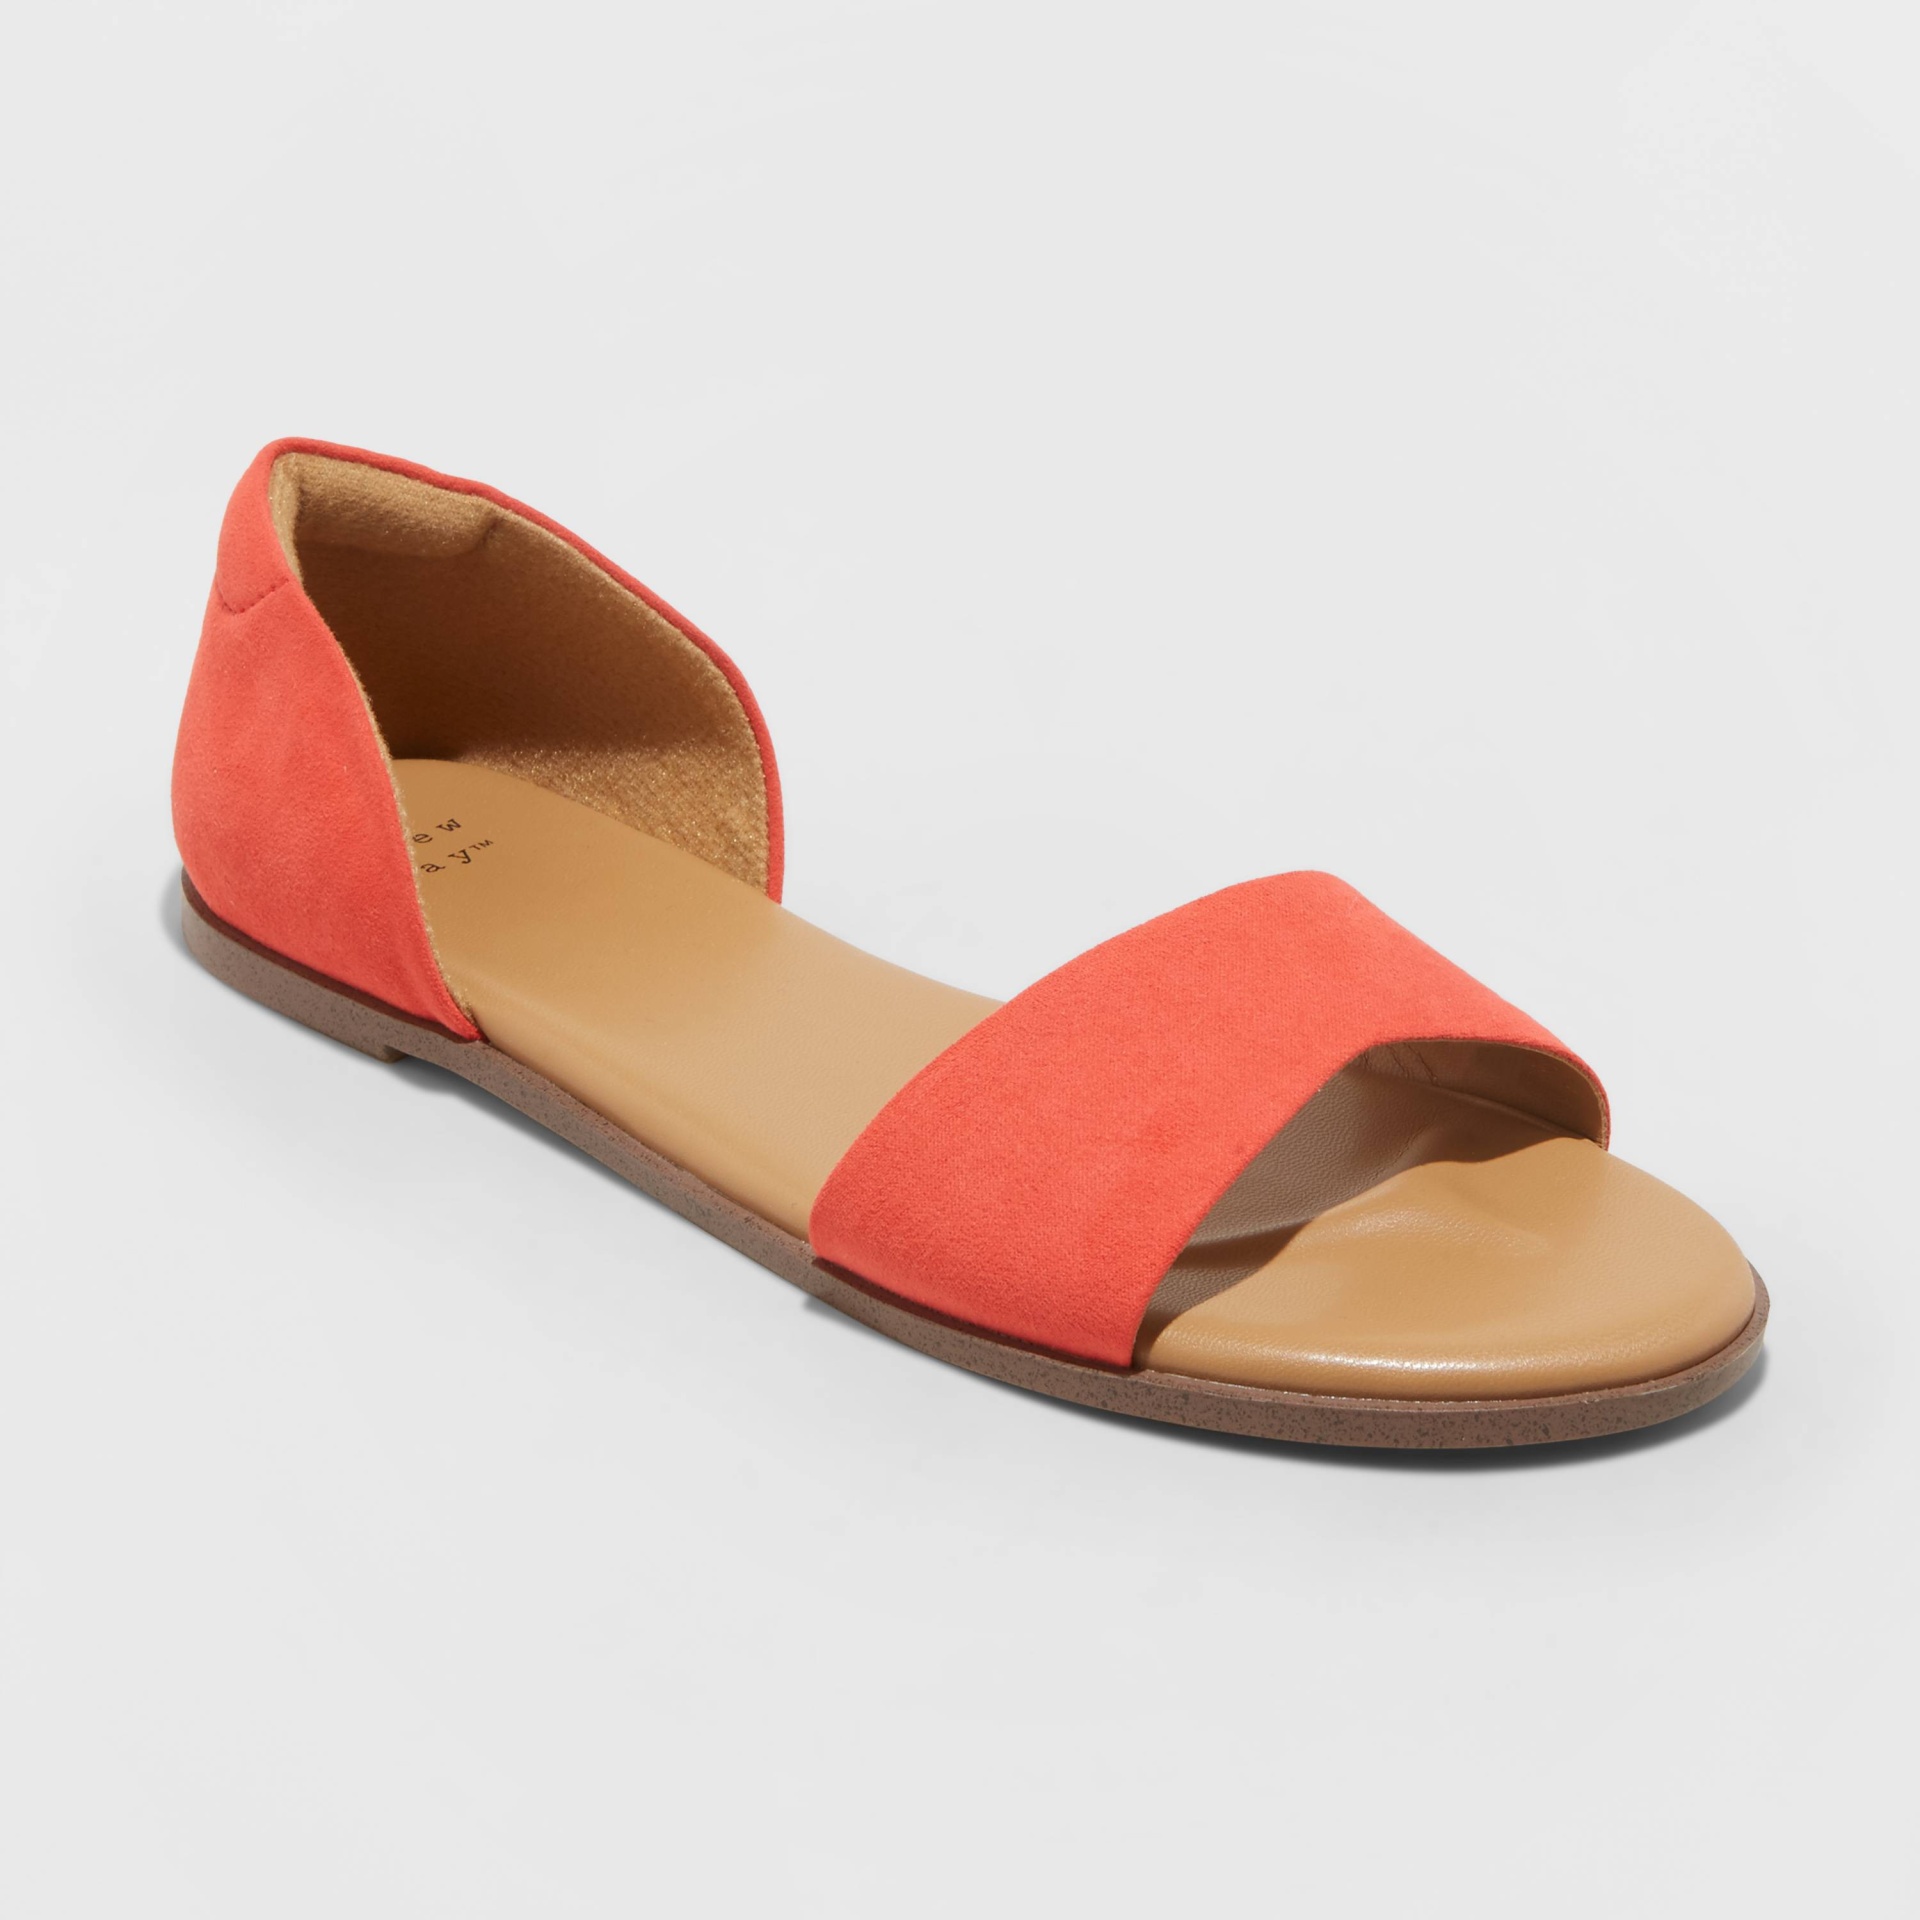 slide 1 of 4, Women's Ann Two Piece Slide Sandals - A New Day Coral 8, 1 ct